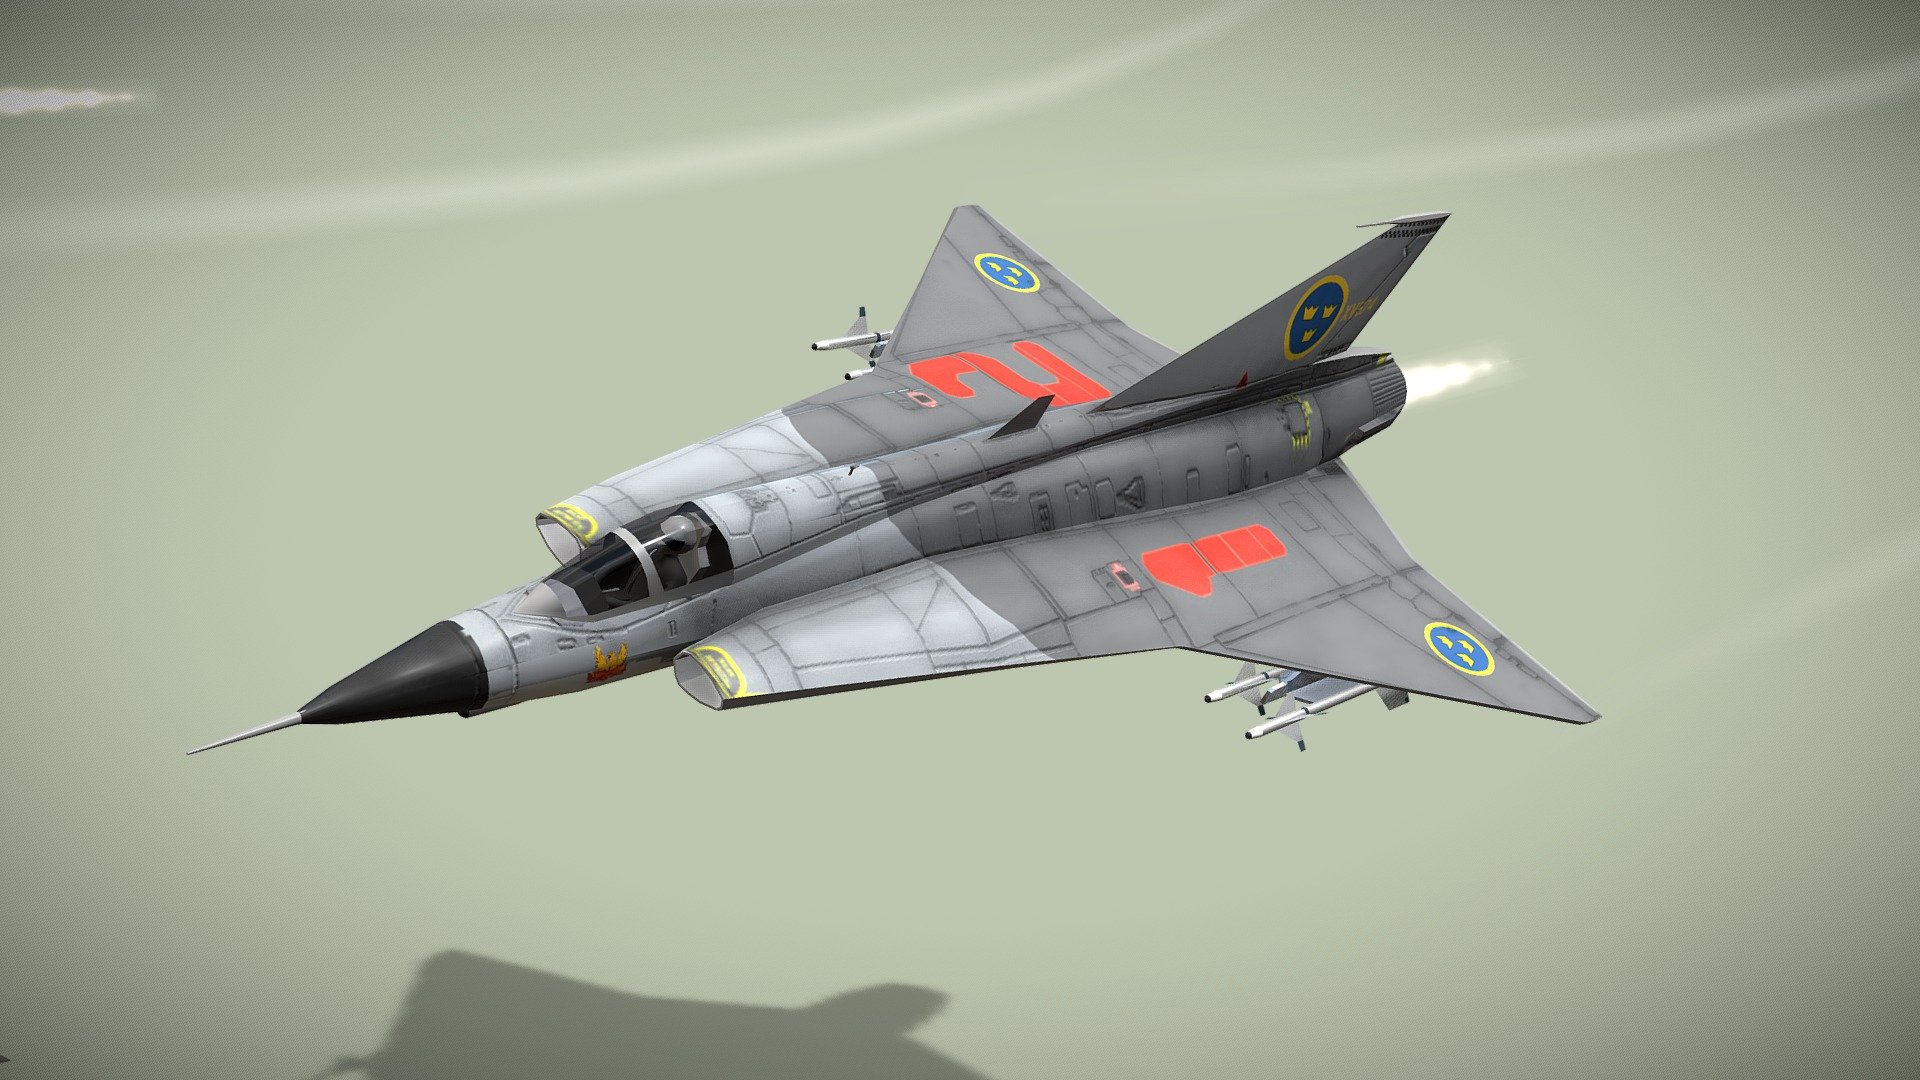 Saab JAS-35 Draken

Lowpoly model of swedish jet fighter



The Saab 35 Draken &lsquo;The Kite' or &lsquo;The Dragon' is a Swedish fighter-interceptor developed and manufactured by SAAB between 1955 and 1974. Development of the Saab 35 Draken started in 1948. It featured an innovative but unproven double delta wing, which led to the creation of a sub-scale test aircraft, the Saab 210, which was produced and flown to test this previously-unexplored aerodynamic feature. The full-scale production version entered service with frontline squadrons of the Swedish Air Force on 8 March 1960. It received the designation Flygplan 35 and was produced in several variants and types, most commonly as a fighter type with the prefix J (J 35)



1 standing version and 2 flying versions with afterburner, pilot and armament

Model has bump map, roughness map and 3 x diffuse textures



Check also my other aircrafts and cars.

Patreon with monthly free model - Saab JAS-35 Draken lowpoly jet fighter - Buy Royalty Free 3D model by NETRUNNER_pl 3d model